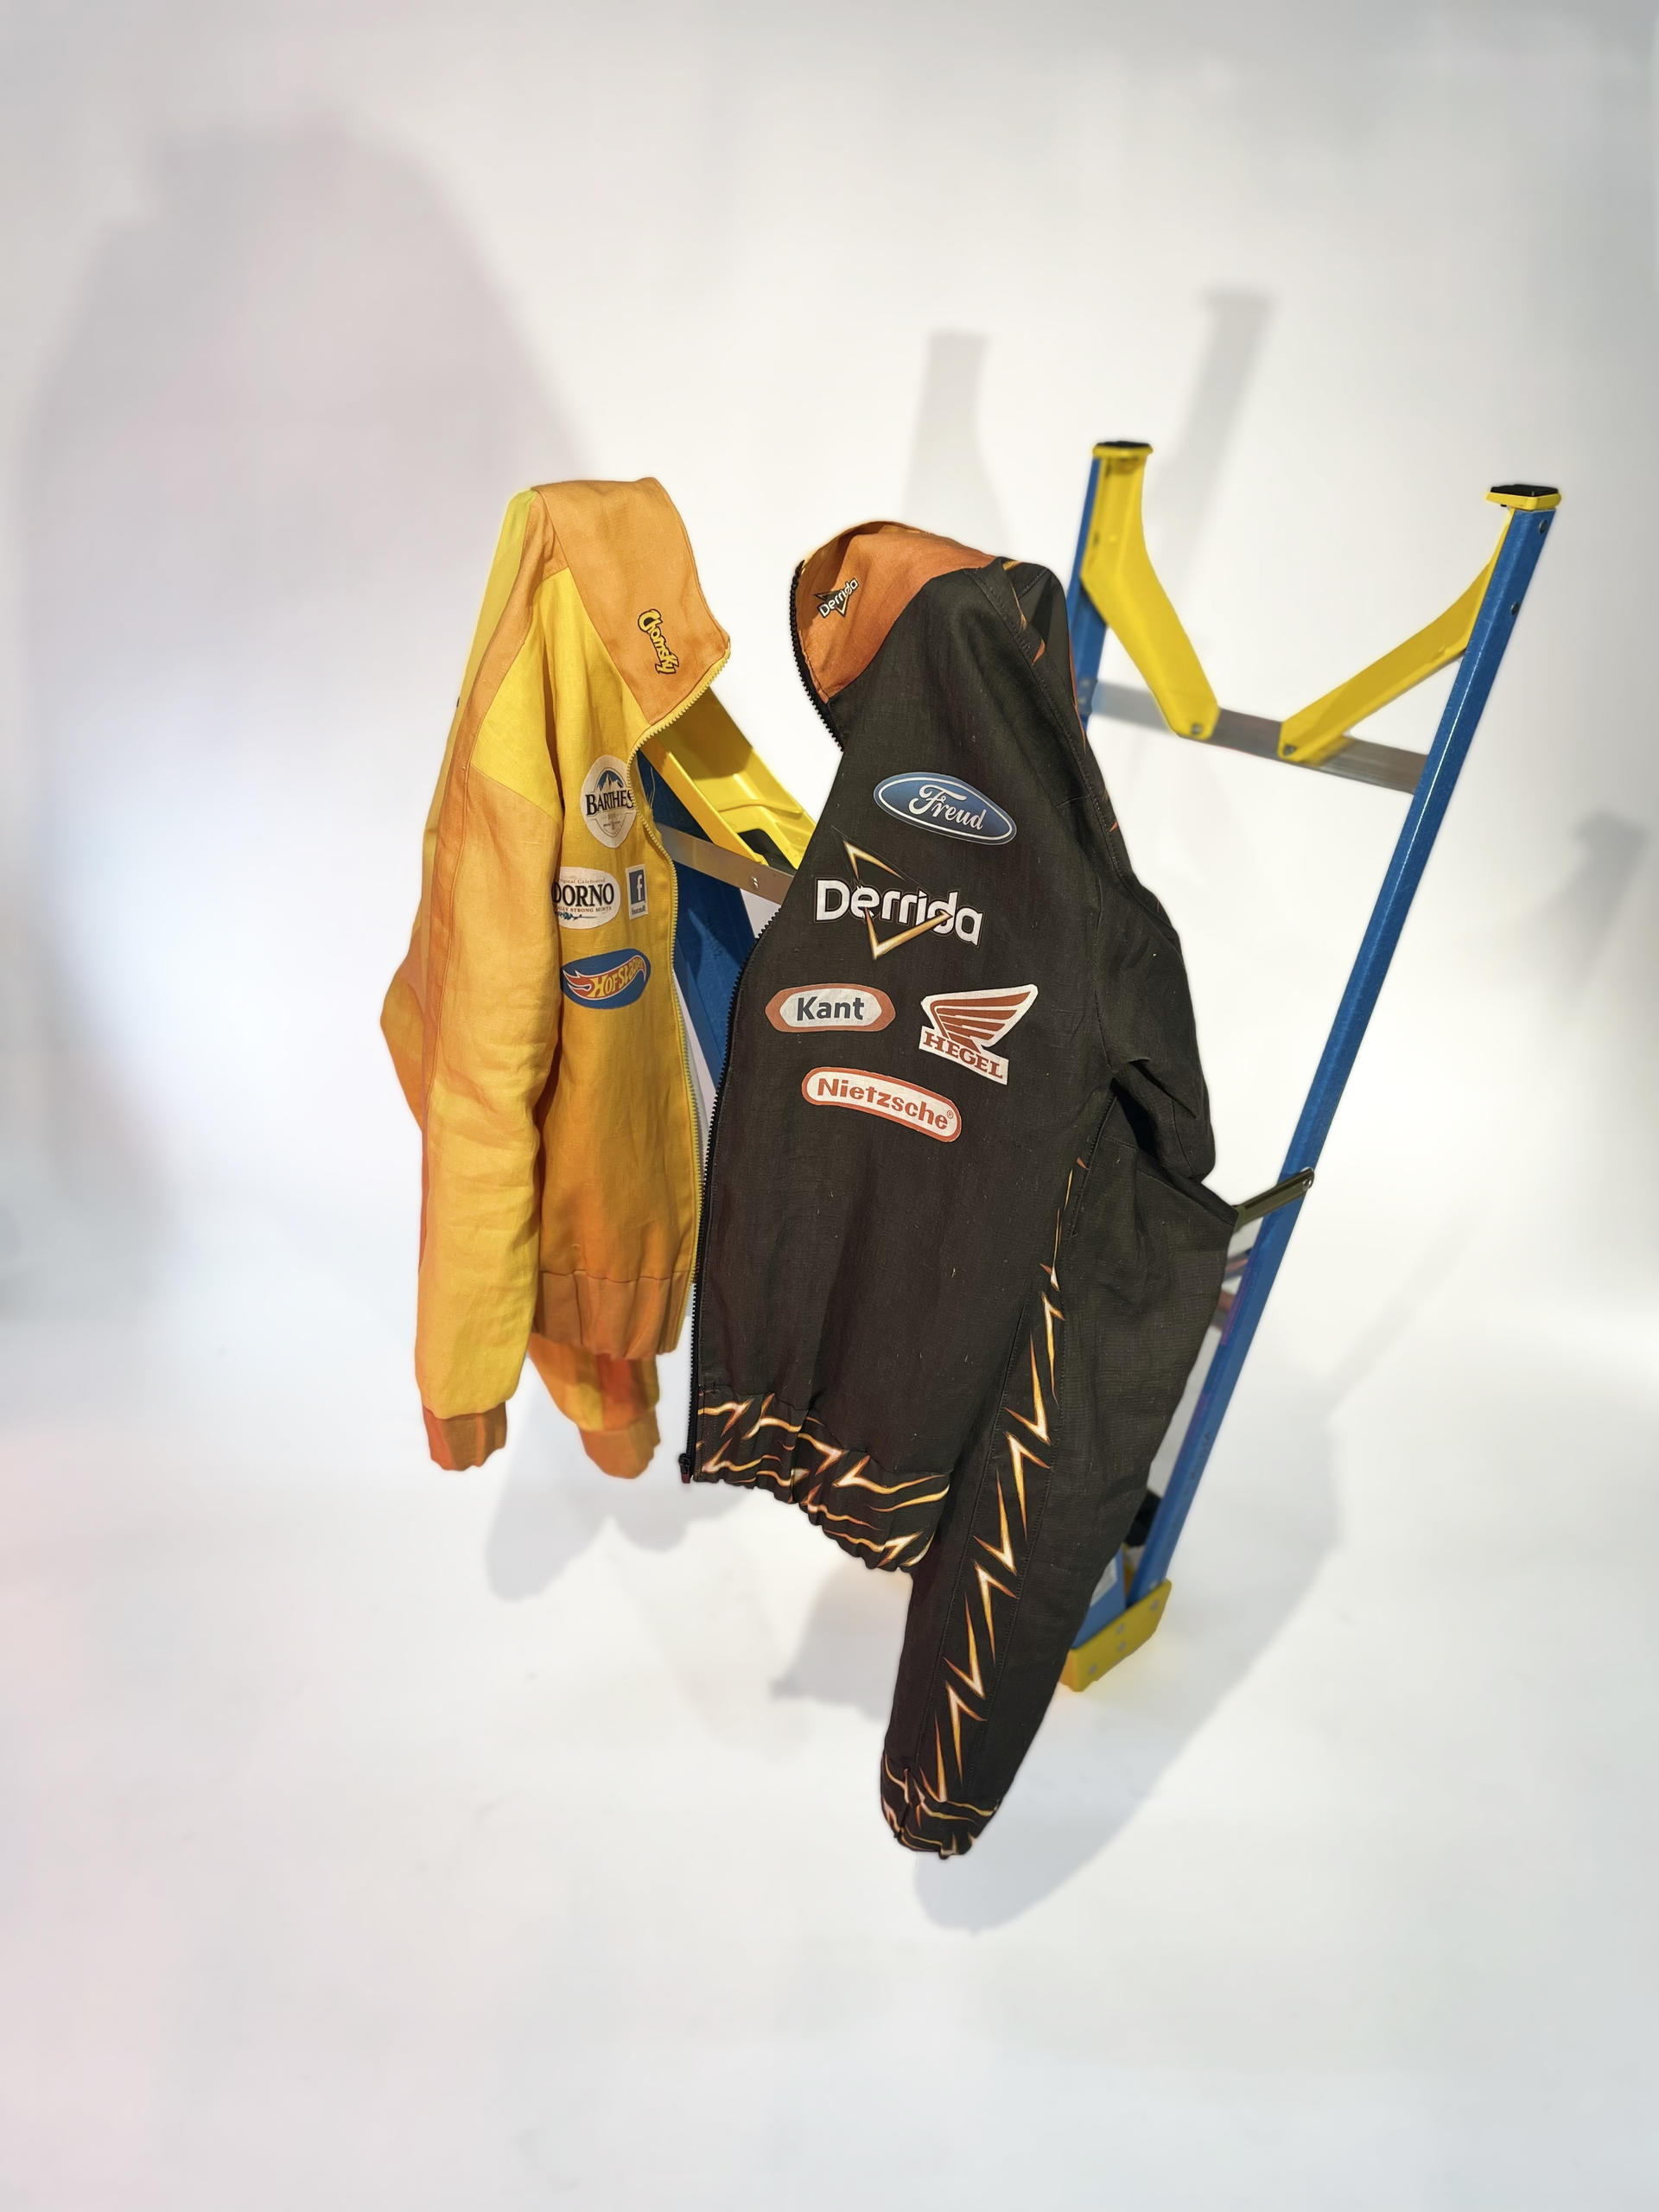 Two NASCAR style jackets with logos edited to replace brand names with theorist's names.